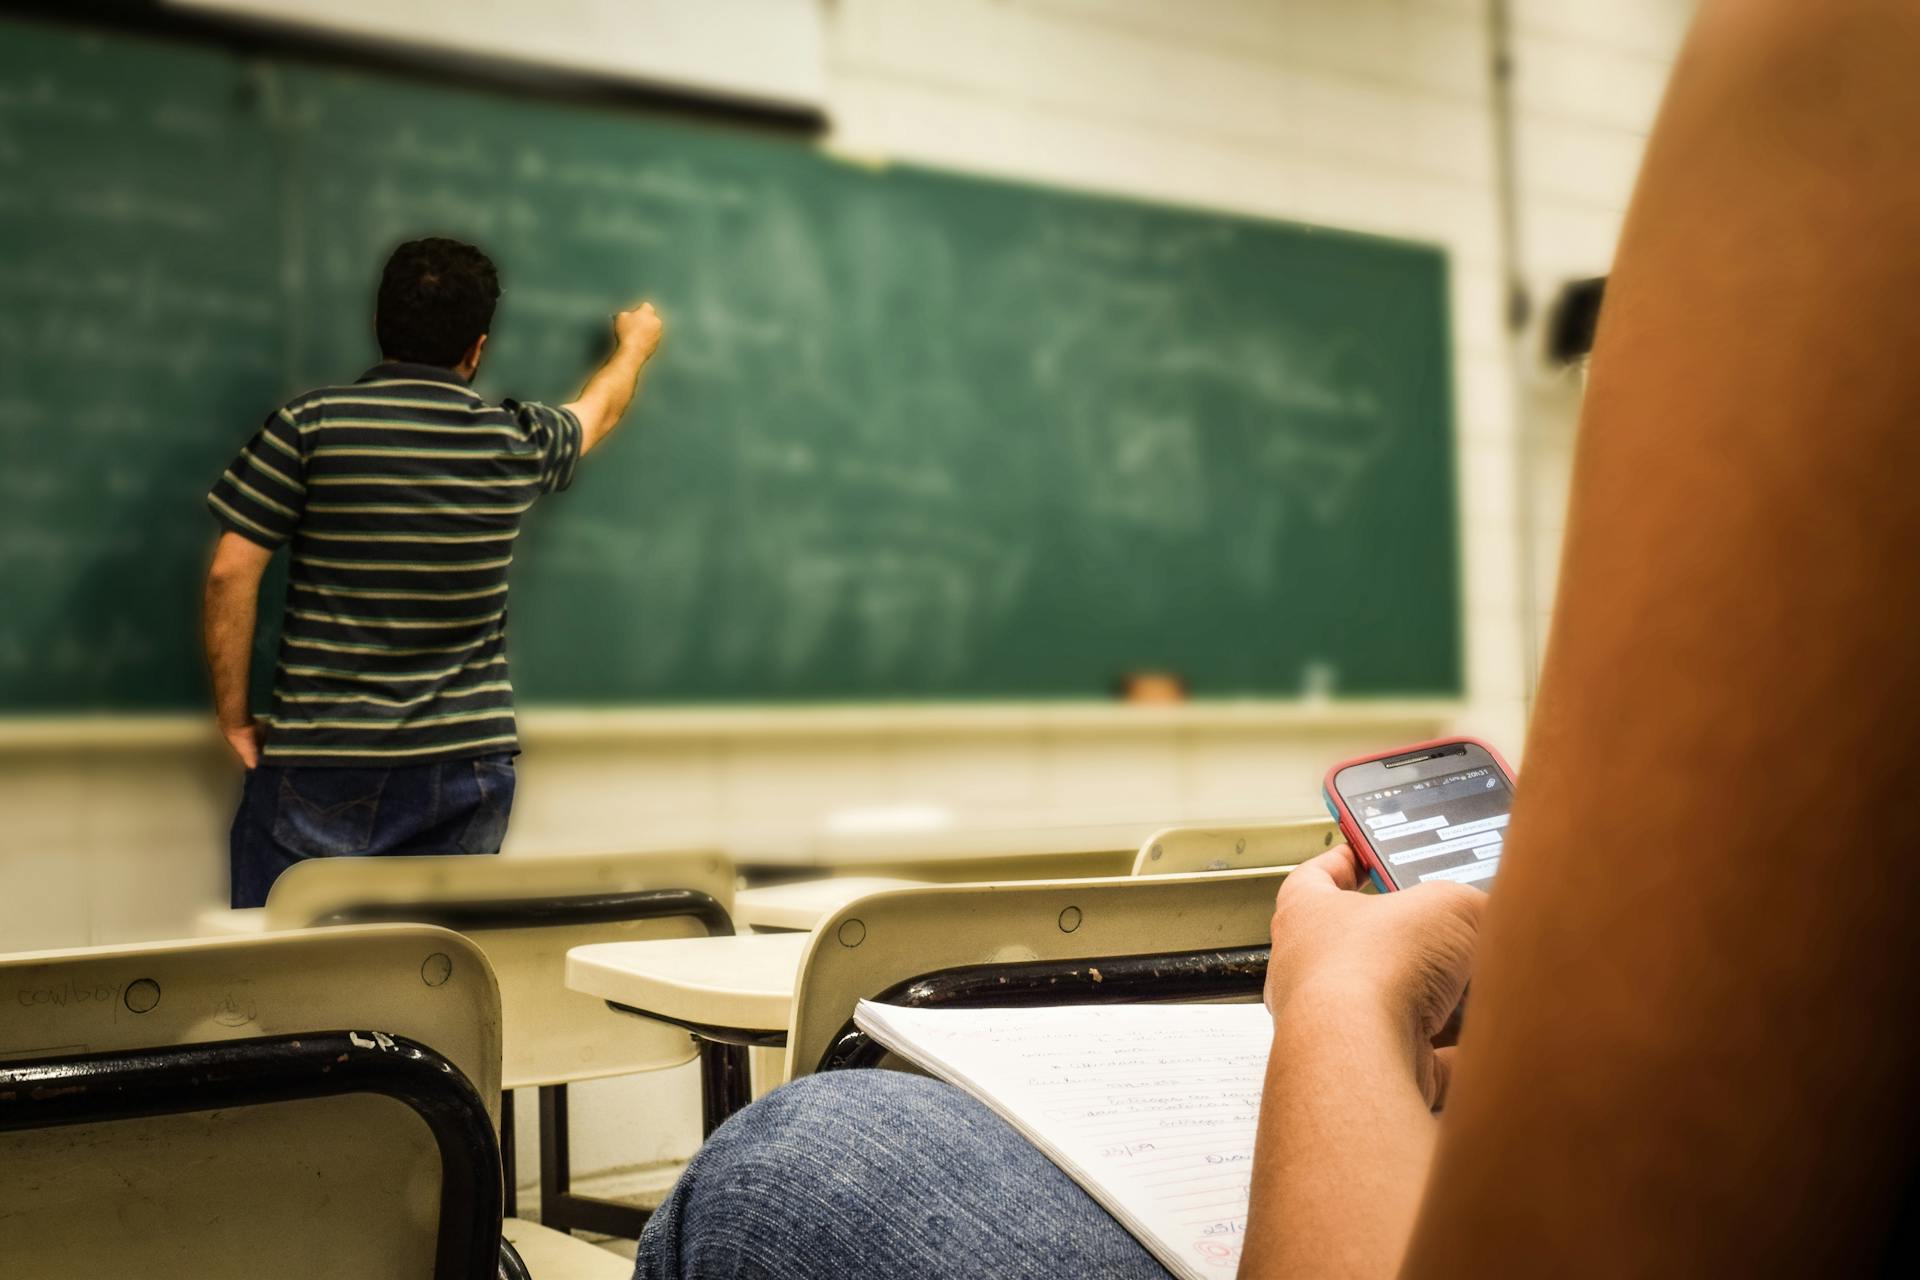 A teacher writing on a board in classroom | Source: Pexels